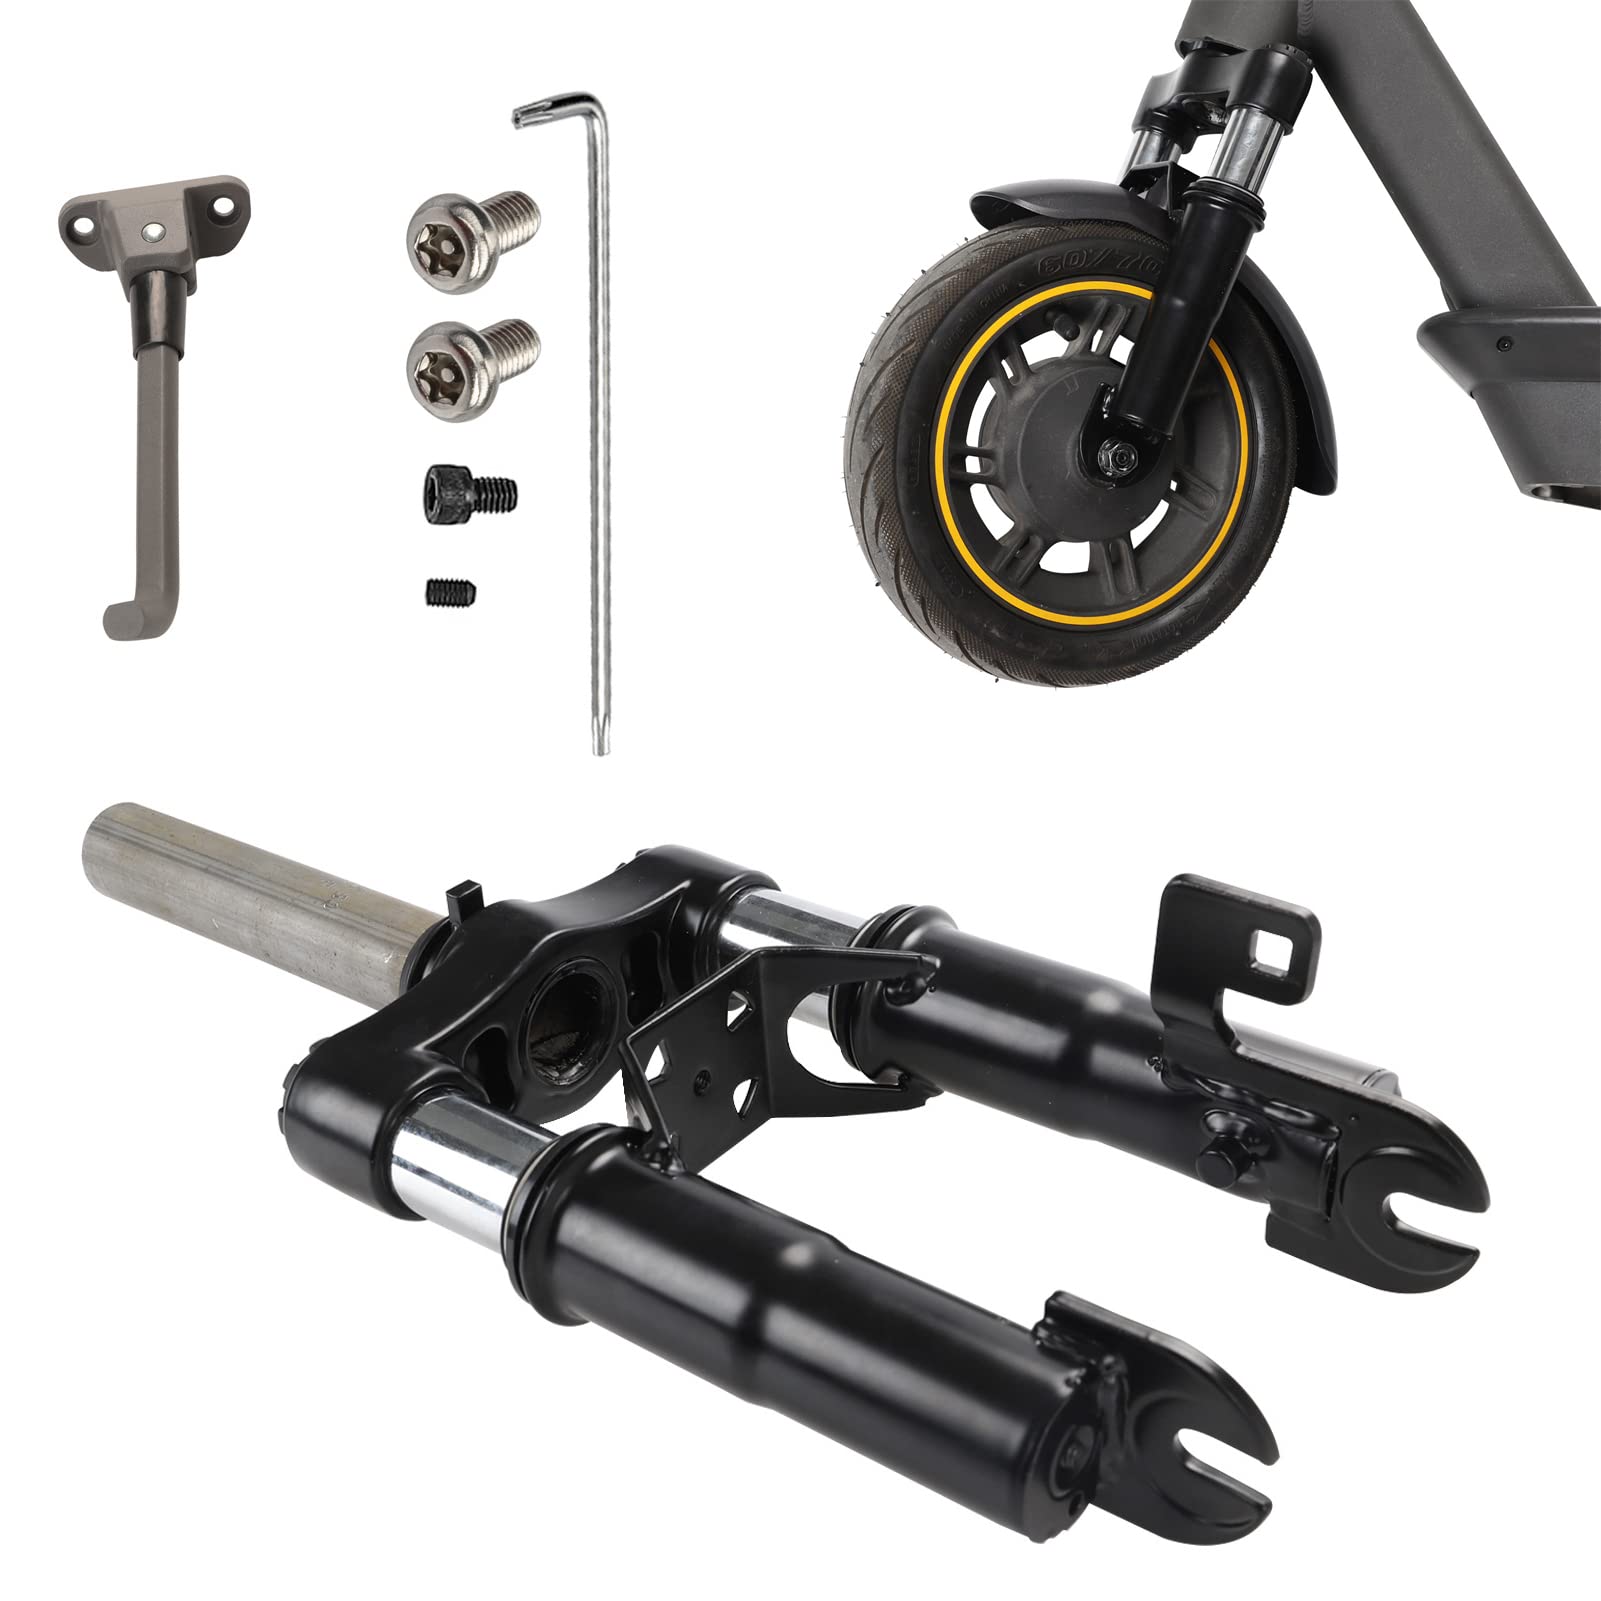 MIMIRACLE Electric Scooter Front Suspension Kit Spring Fork Compatible with Max G30 G30LP Segway Ninebot Electric Scooter Sho